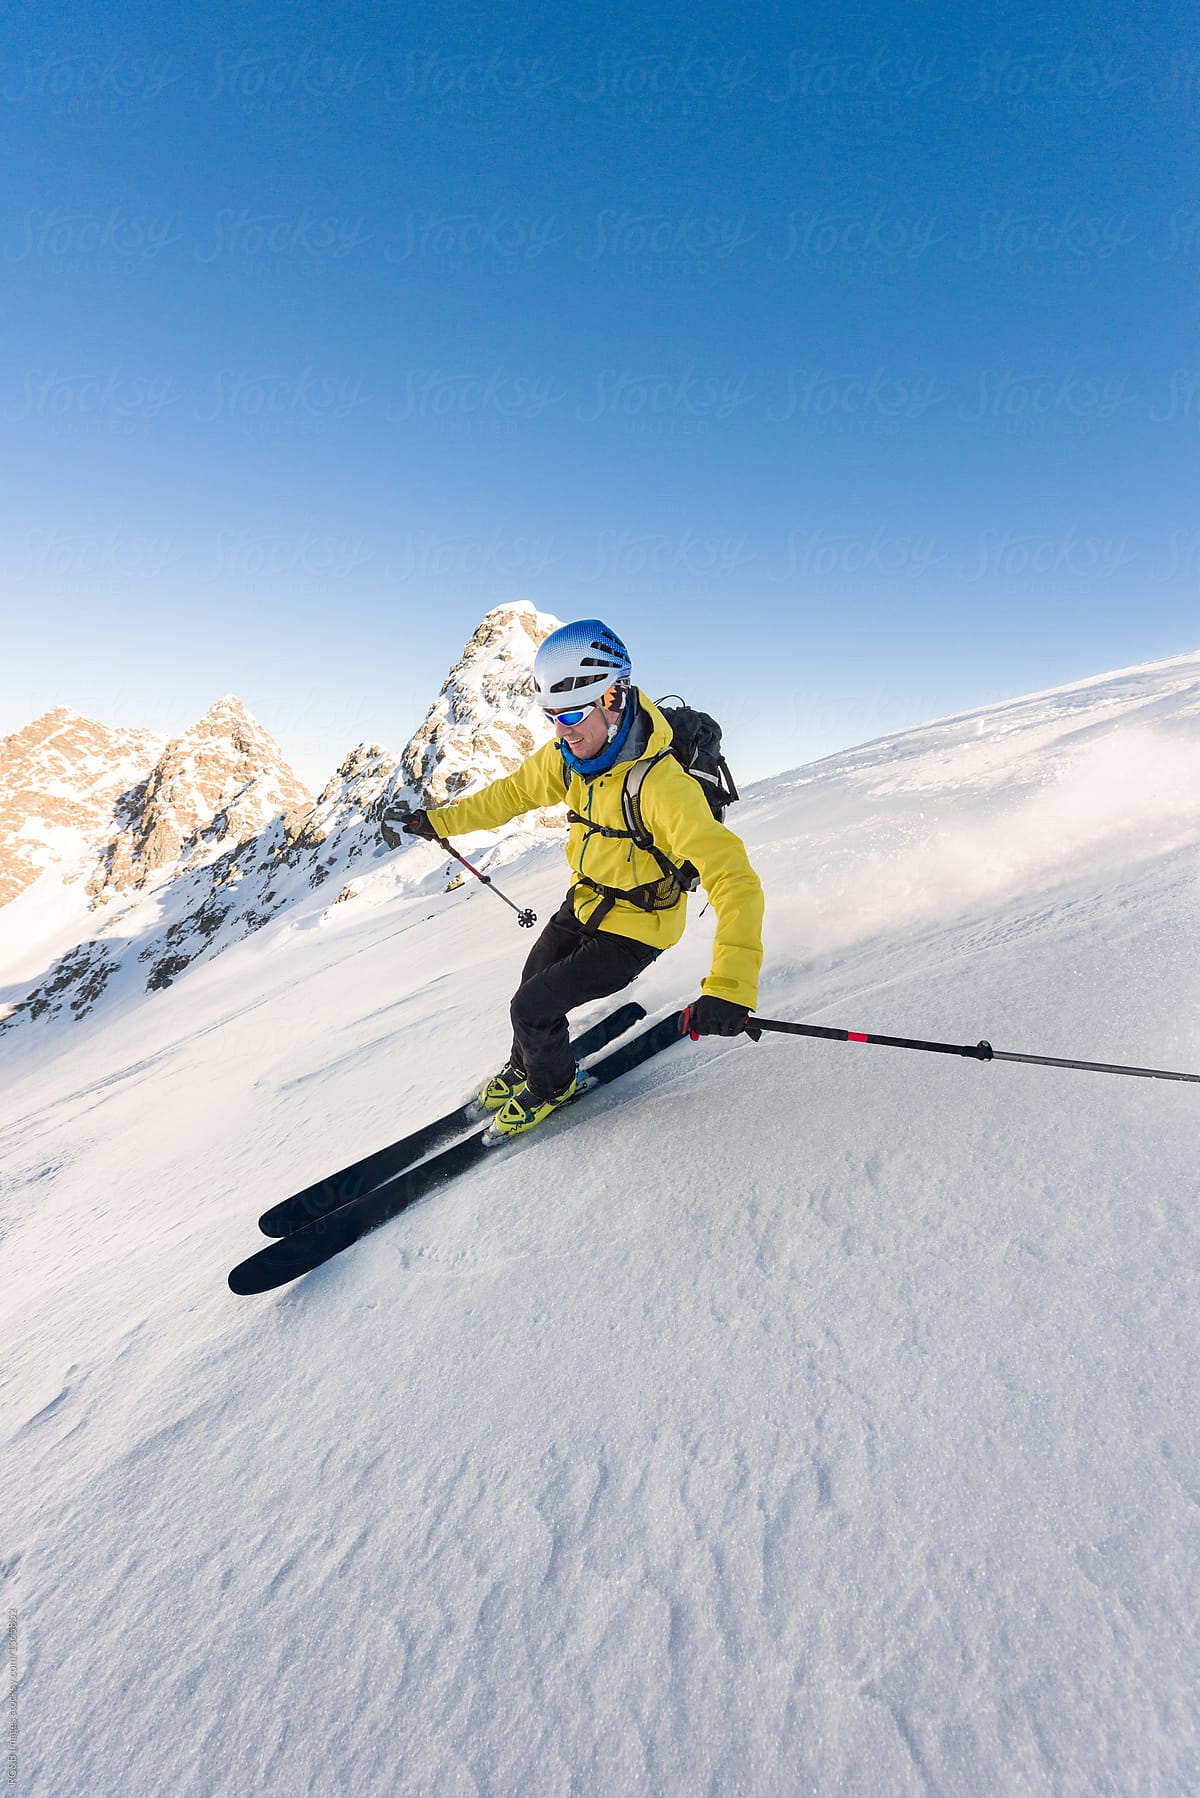 Man skiing downhill steep slope with high speed